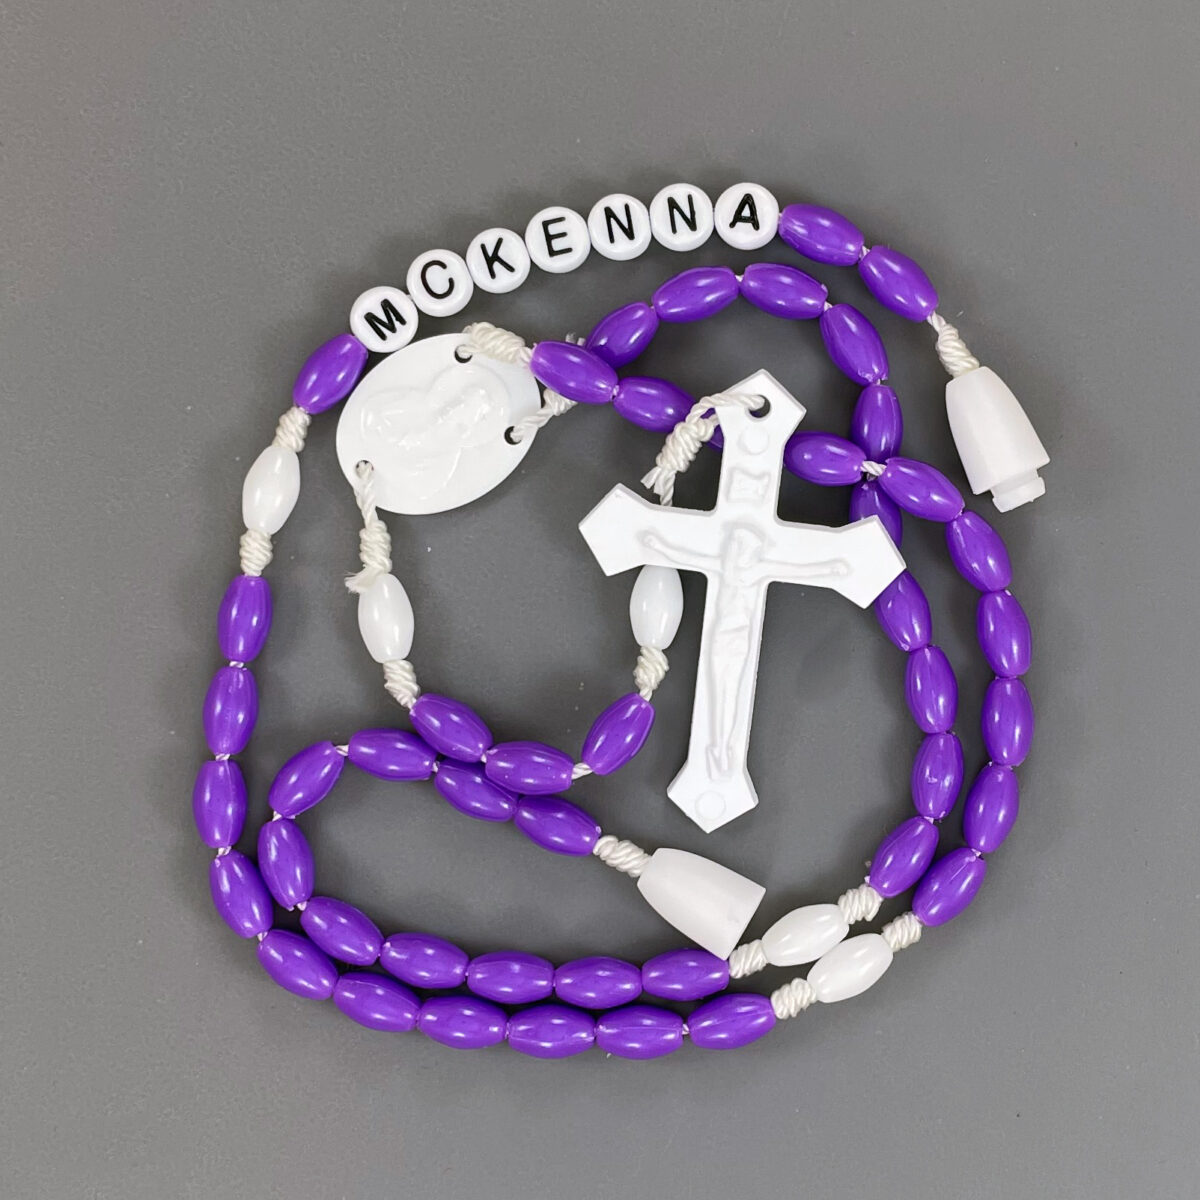 Children’s Safety Clasp Rosary ($4.99 and up)